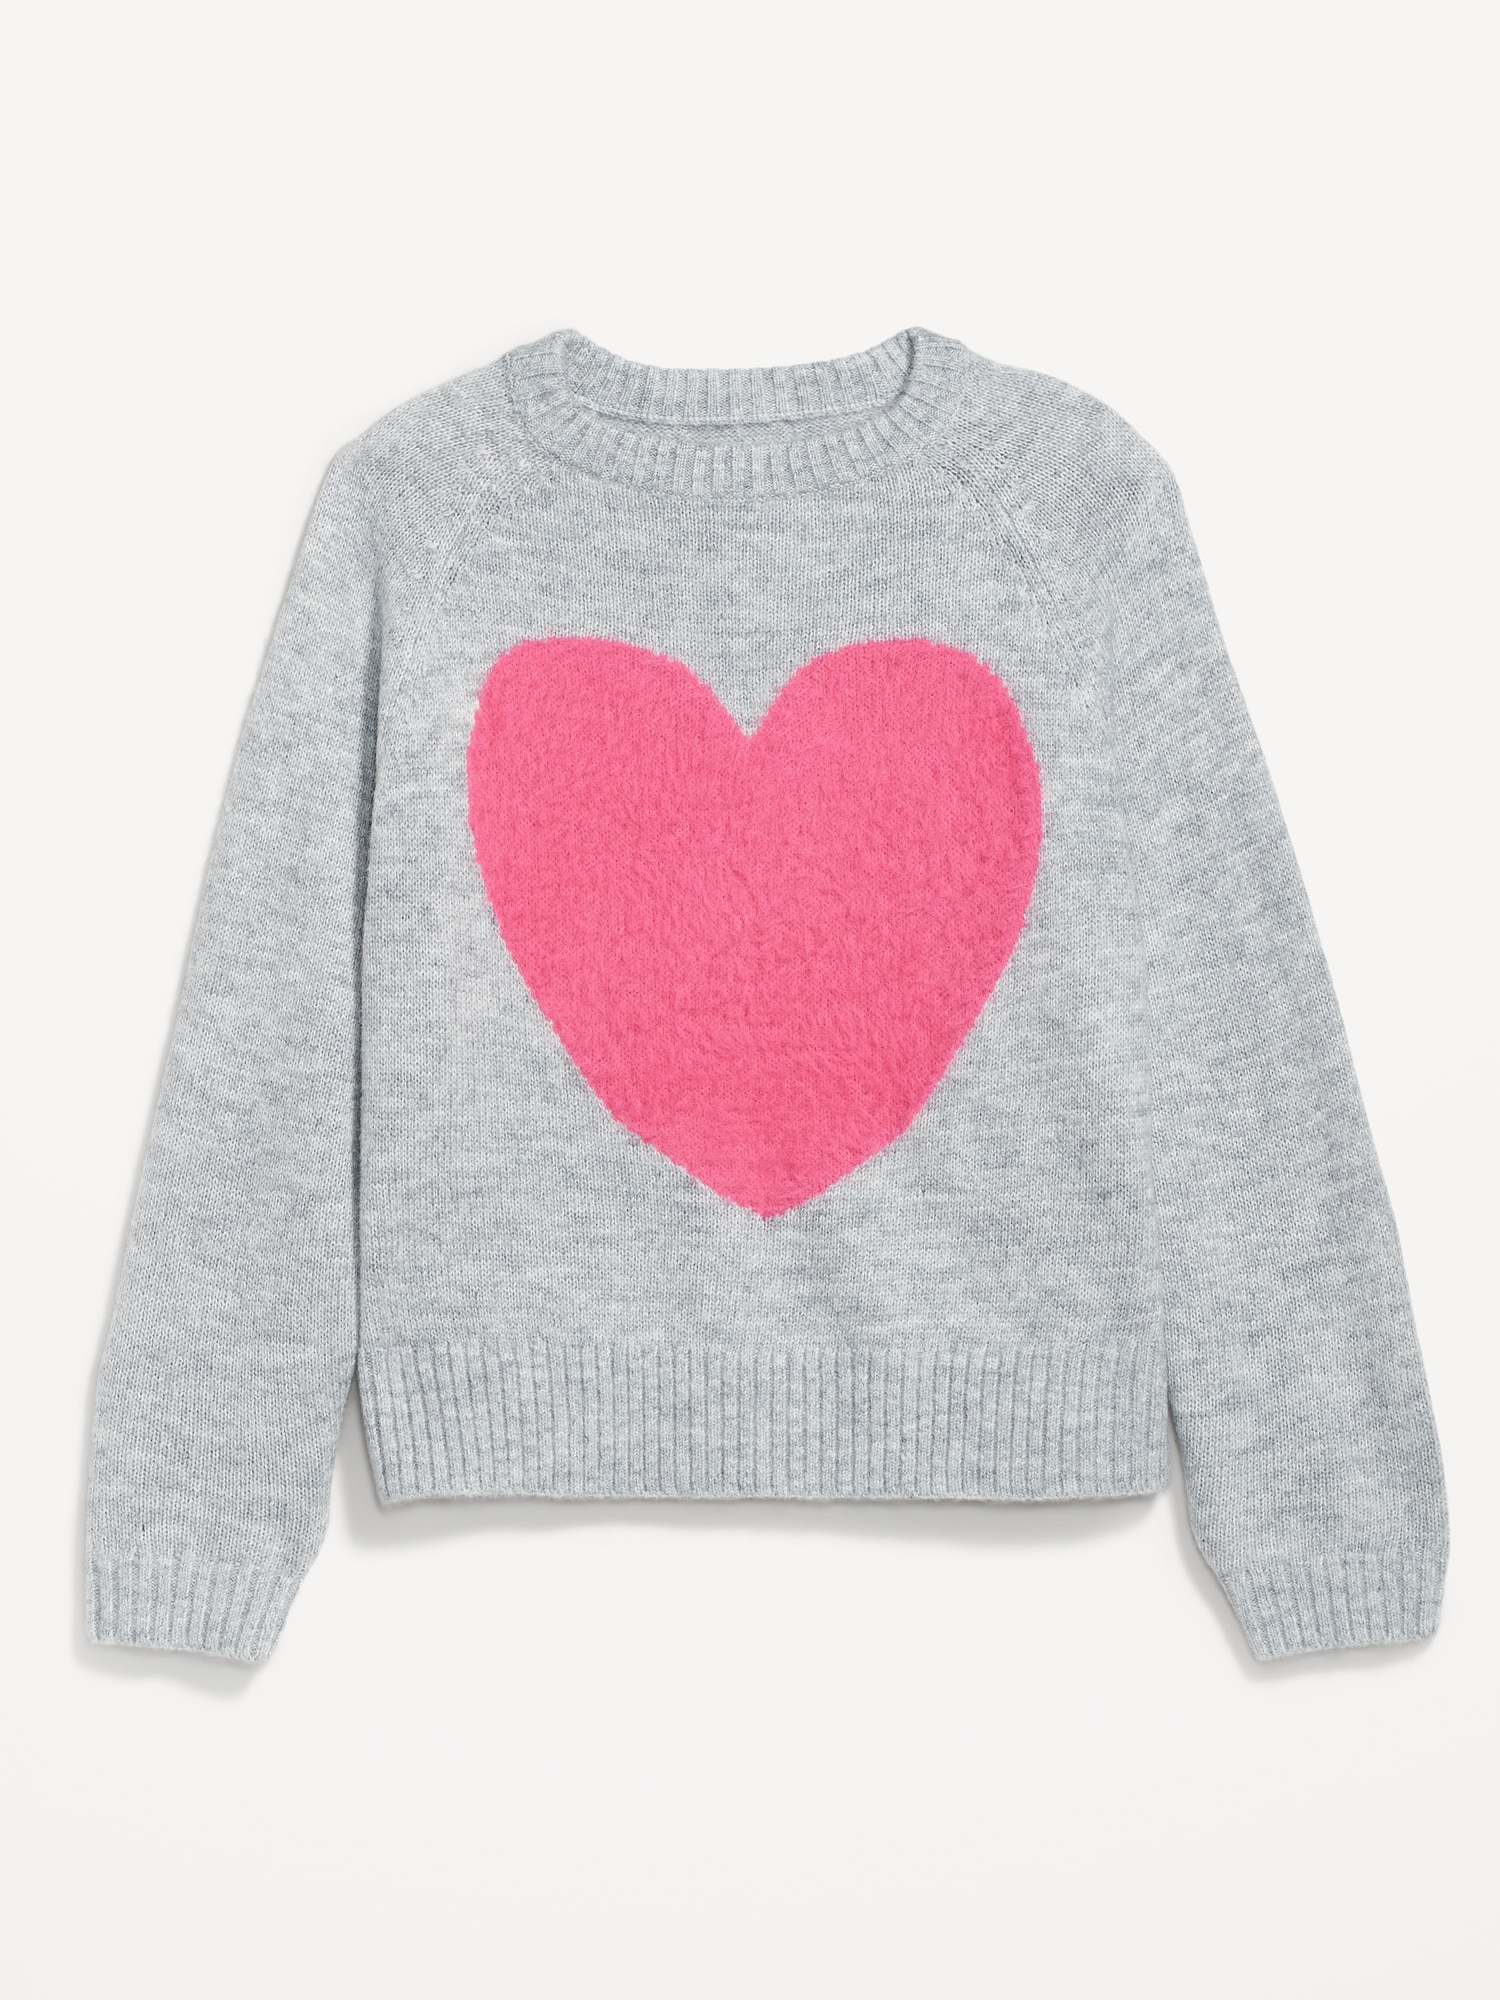 Red Crew neck sweater with heart pattern - Buy Online